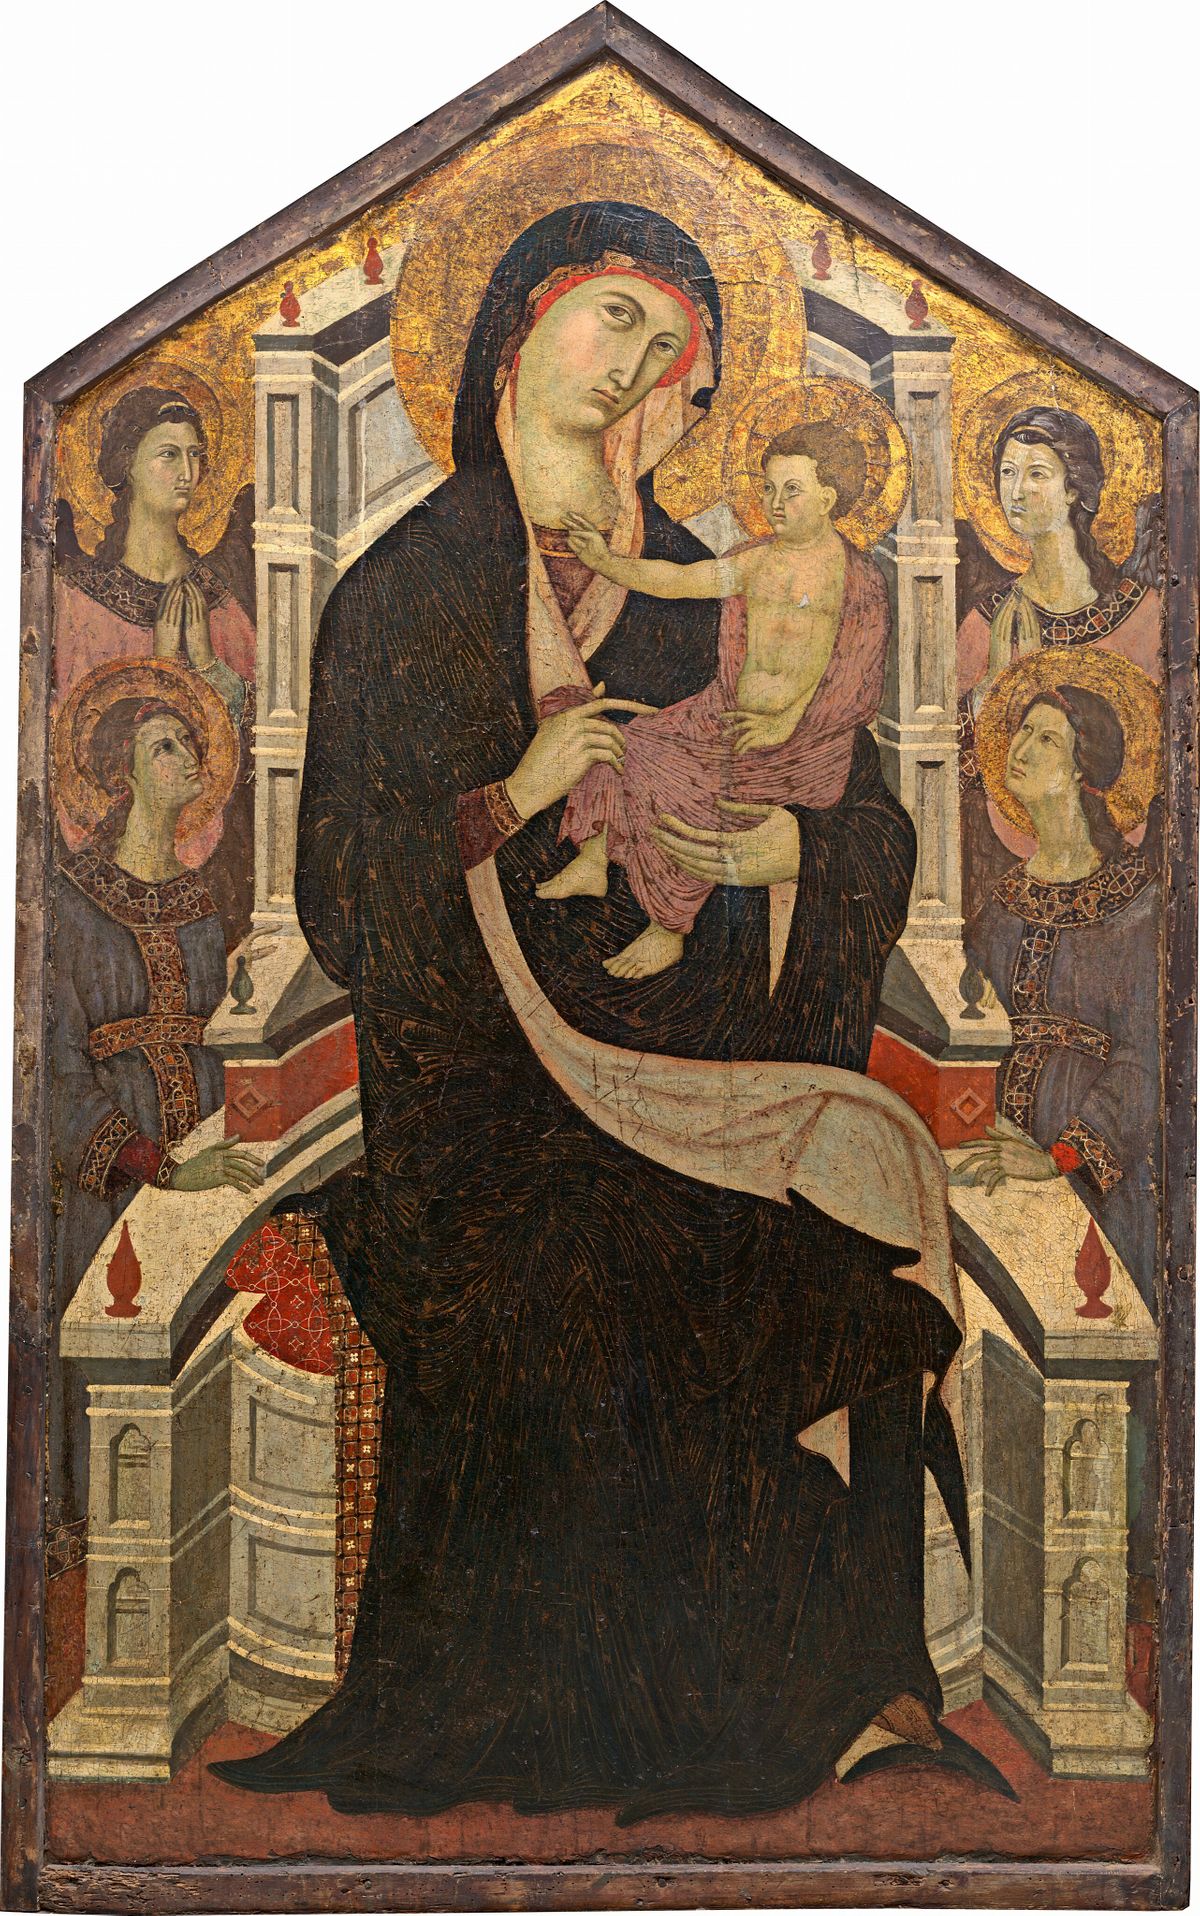 Maestà (Madonna and Child with Four Angels) by Master of Città di Castello (1290) - Public Domain Catholic Painting